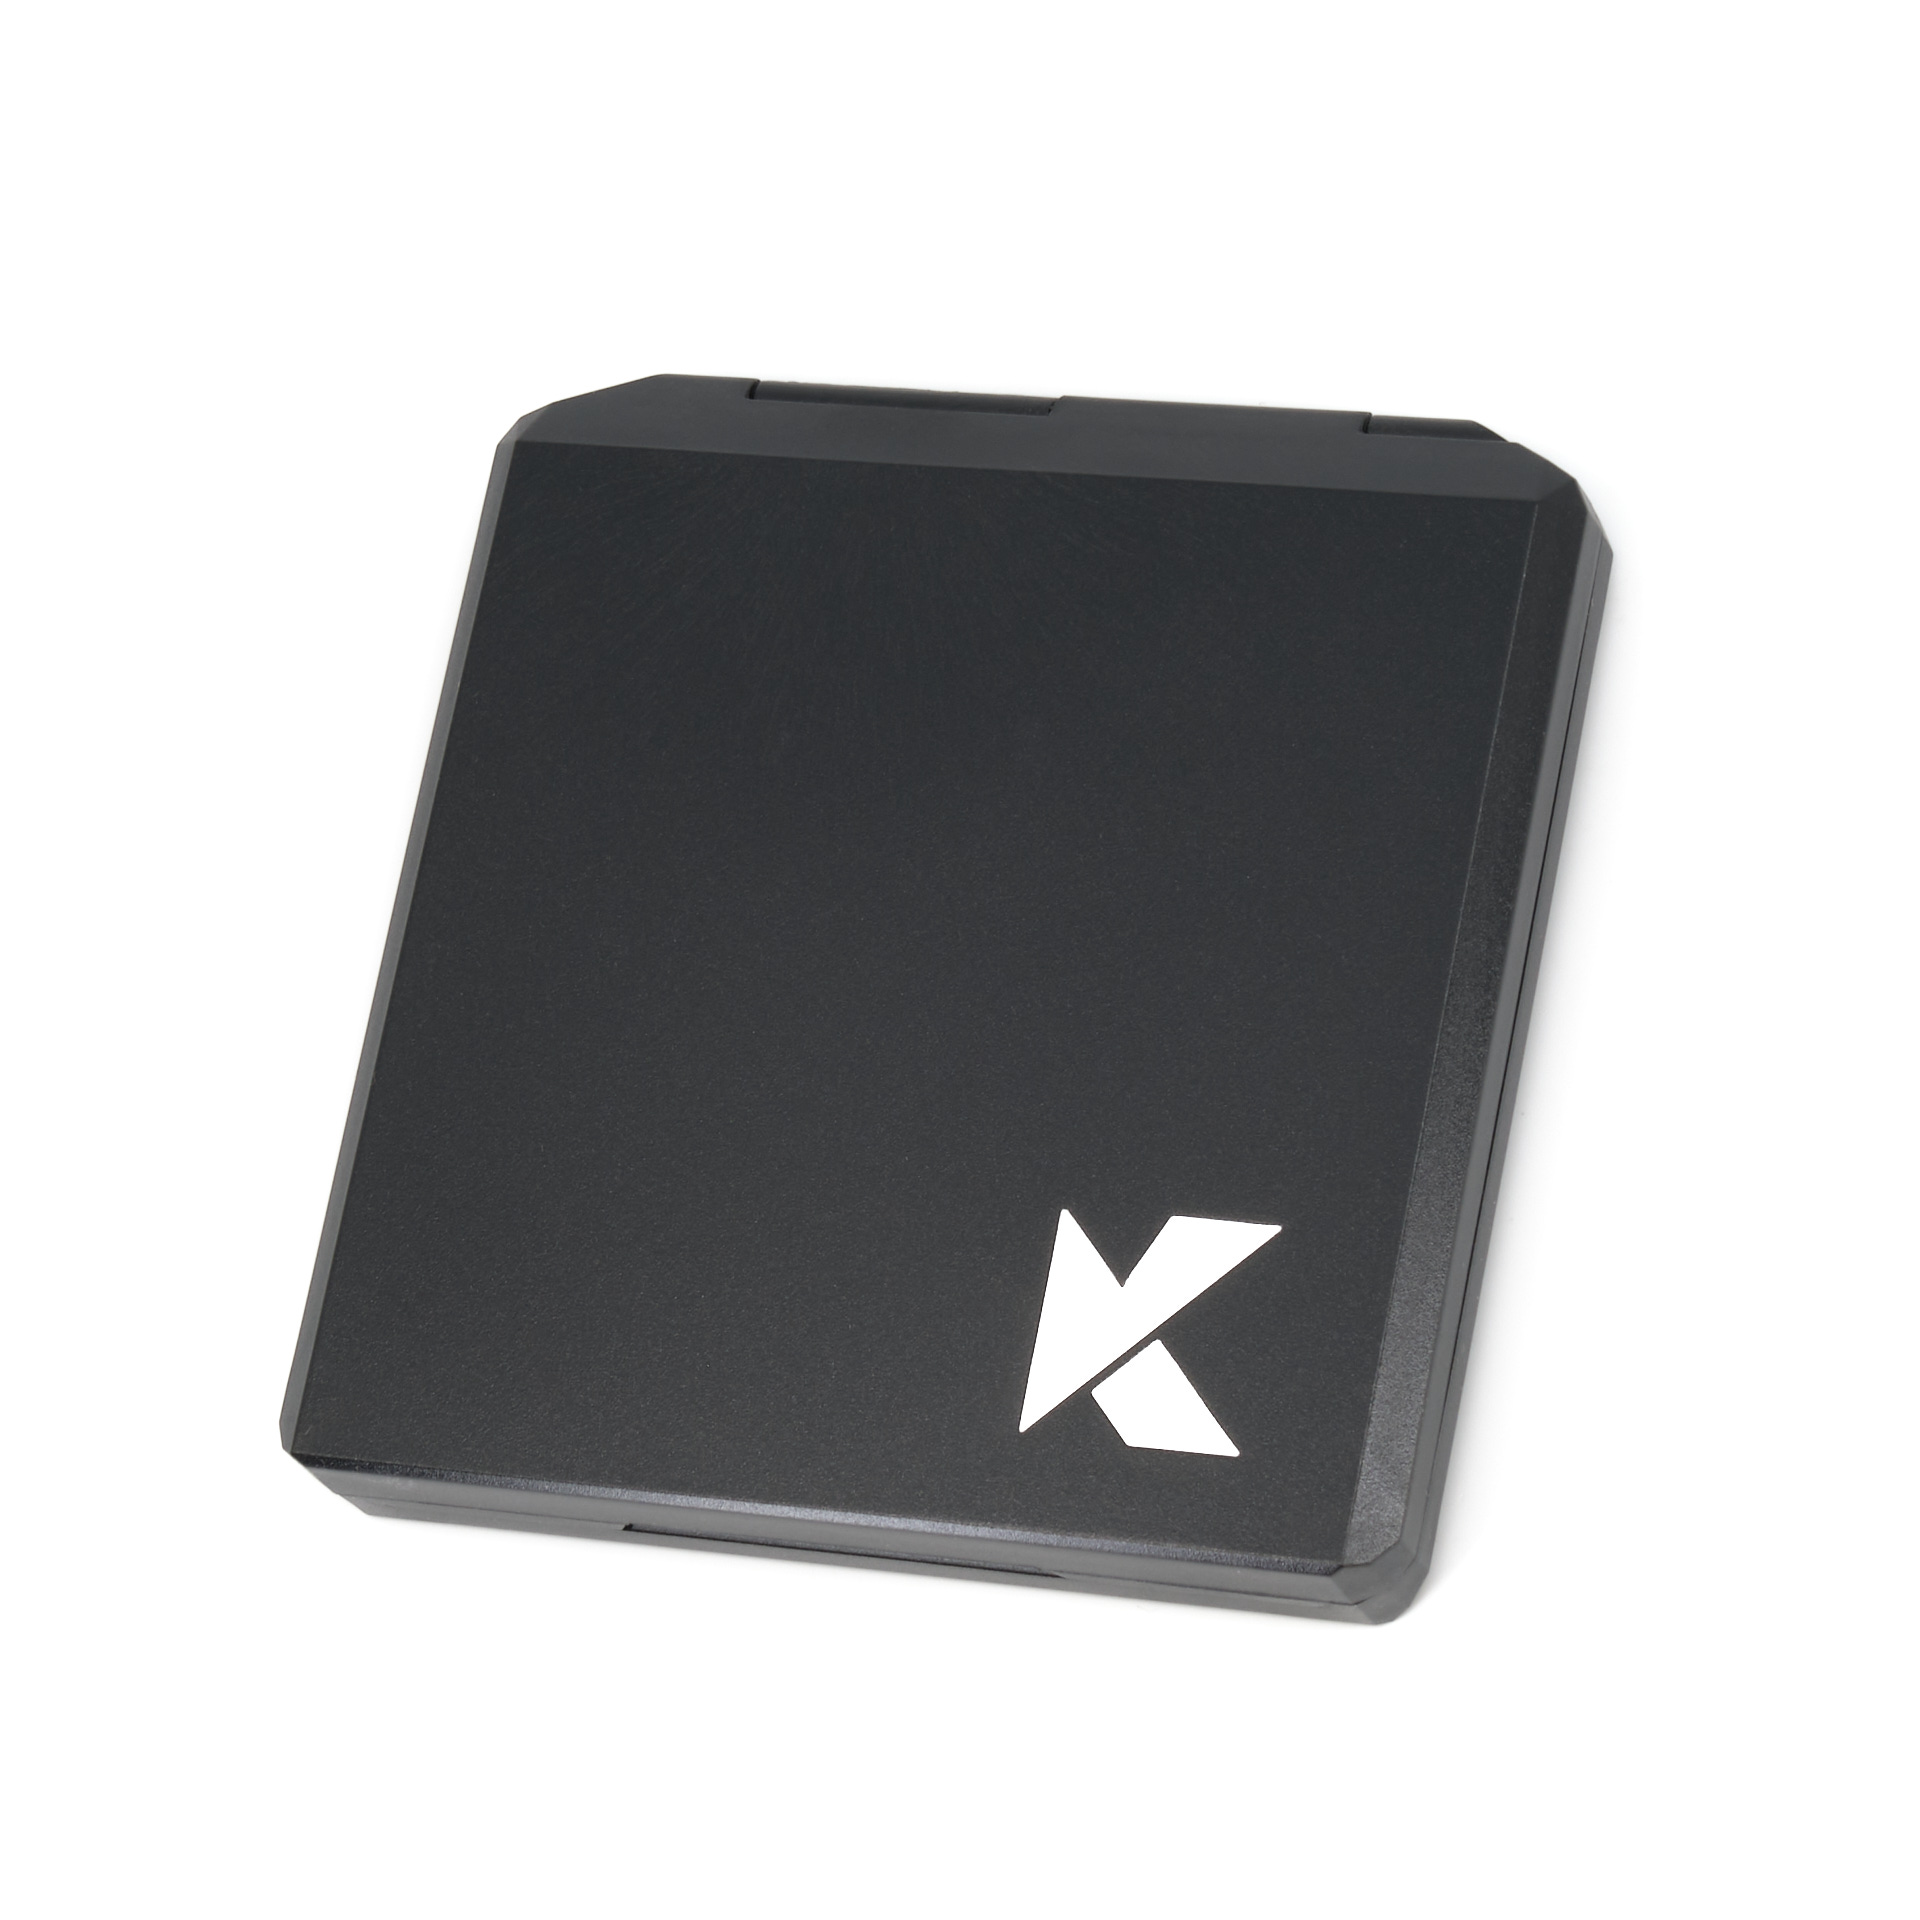 kolari vision's black magnetic case for carrying and protecting filters